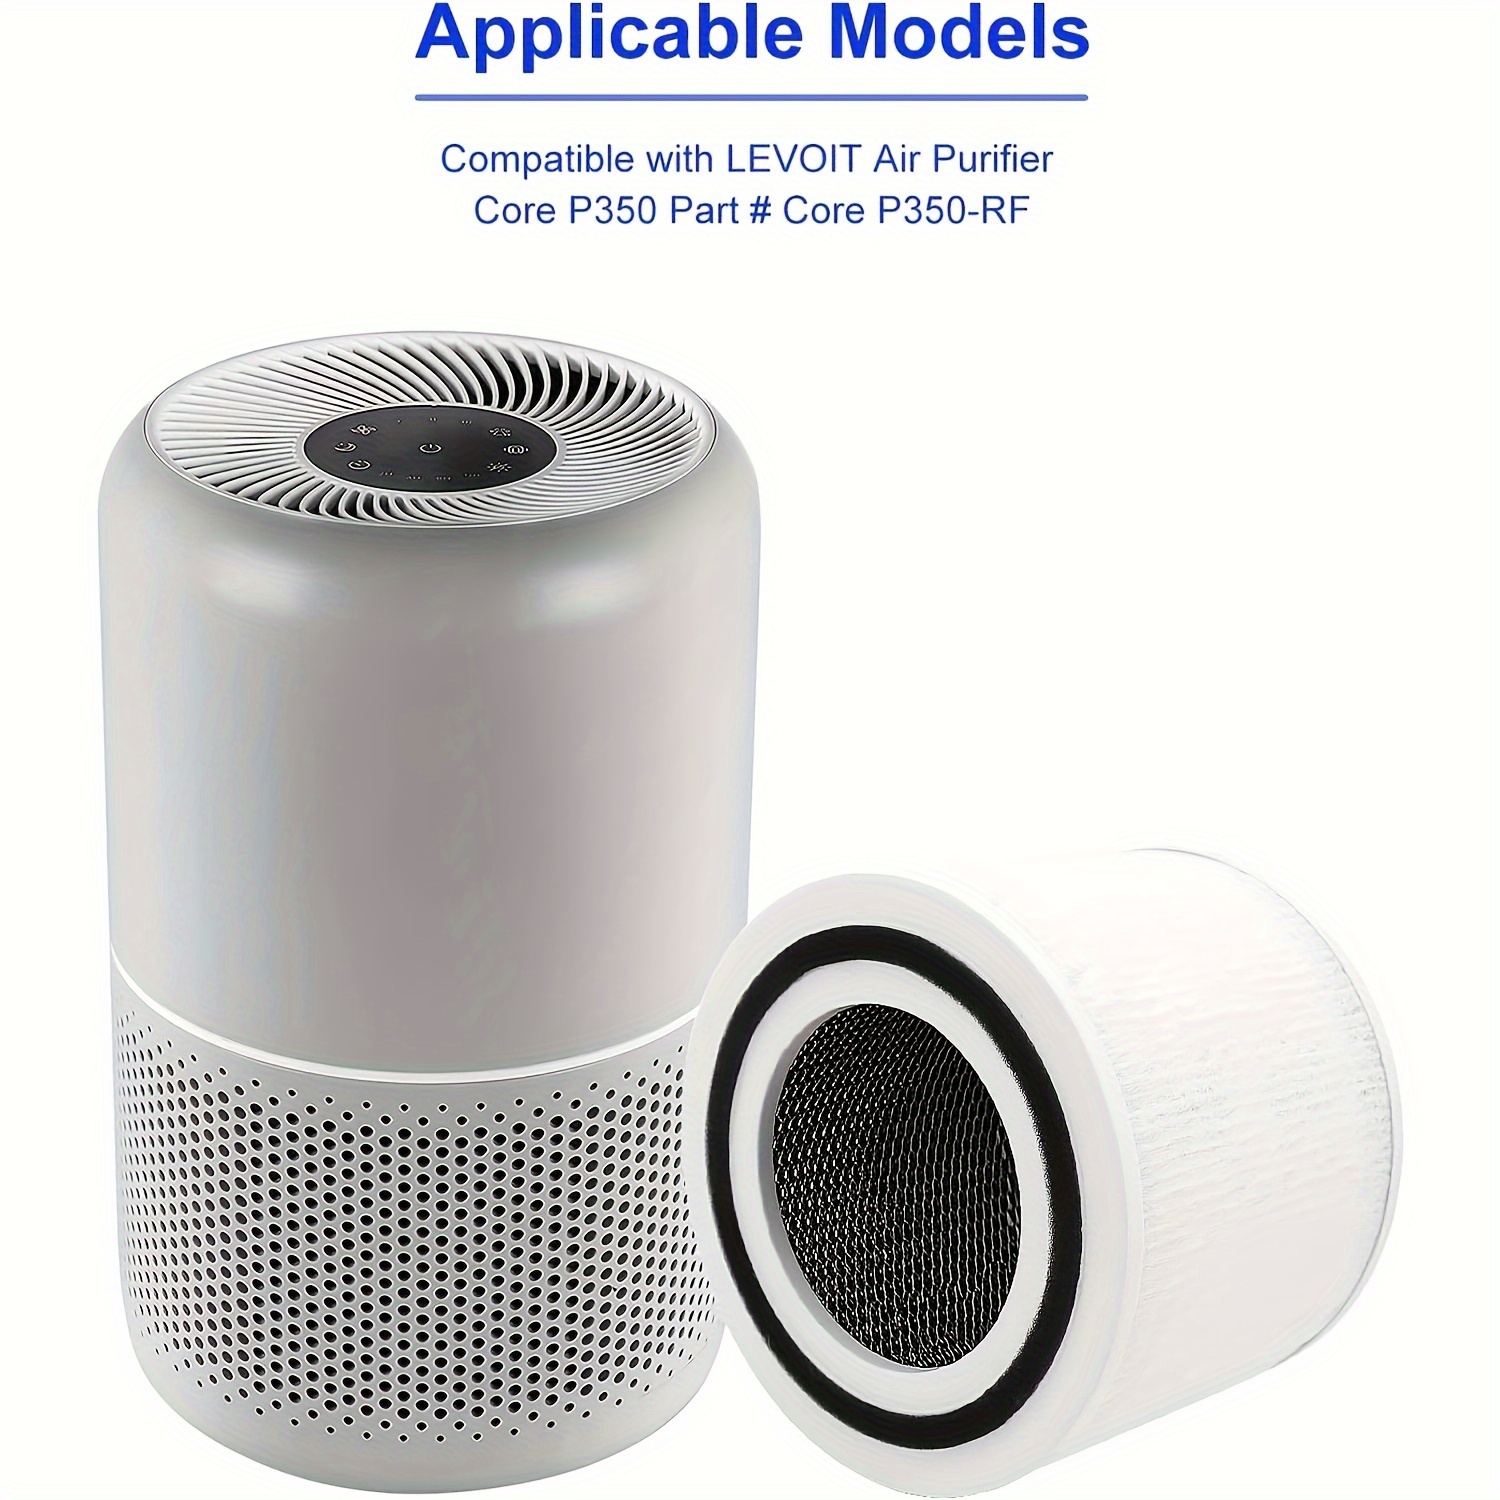 HEPA Filter Replacement Accessories For Levoit Air Purifier, Lv-H132, Lv-H132-Rf  Activated Carbon Filter Kit